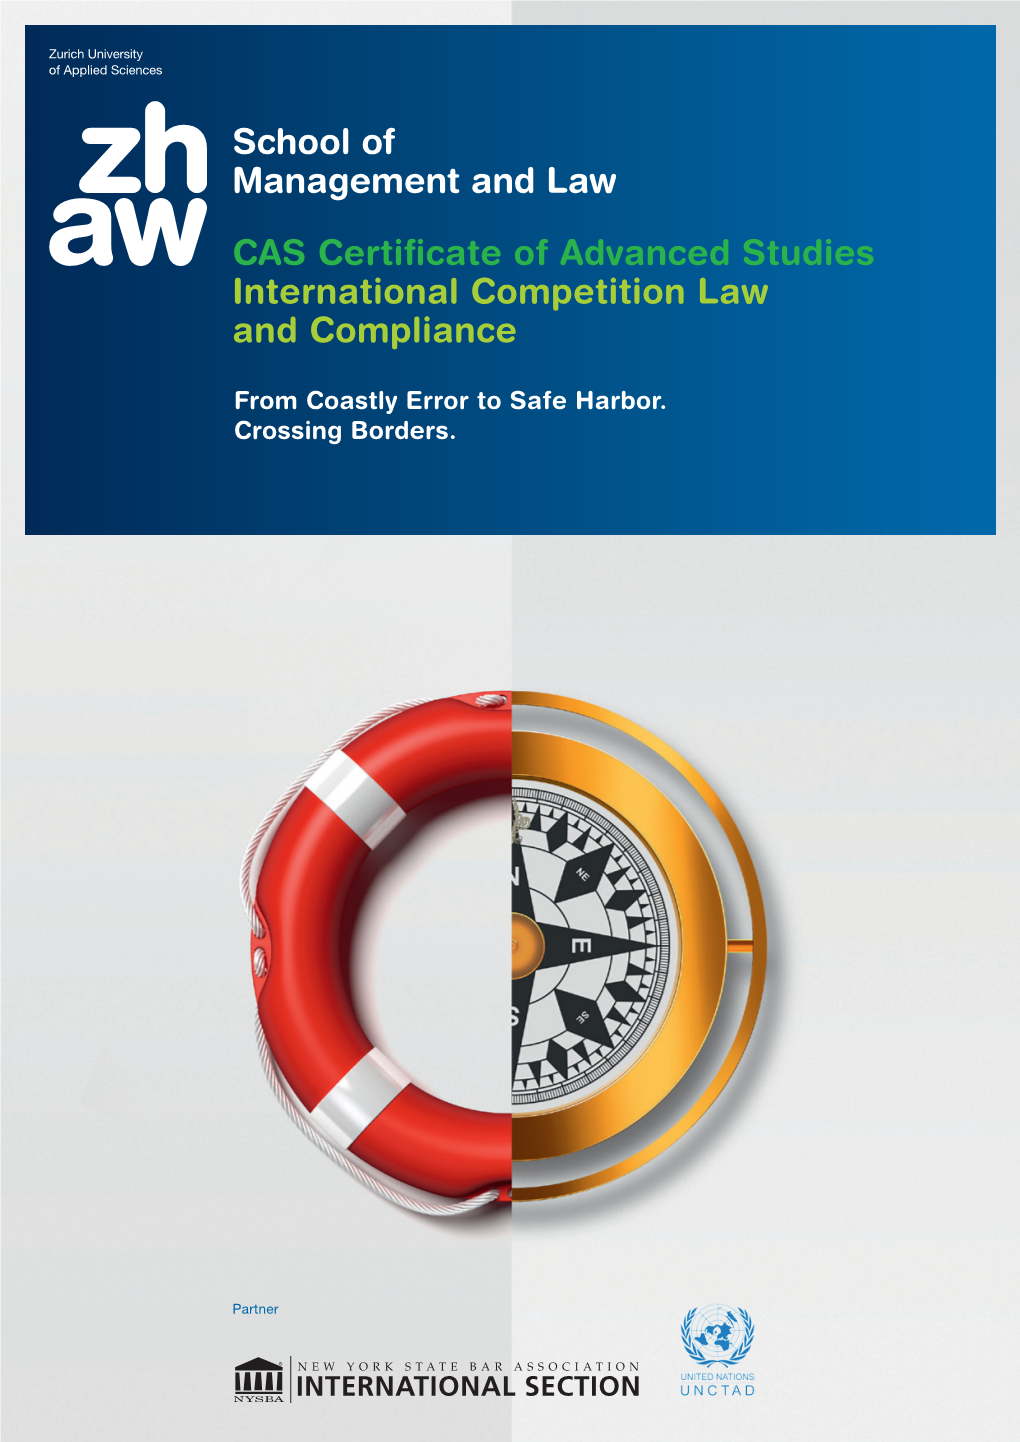 CAS Certificate of Advanced Studies International Competition Law and Compliance